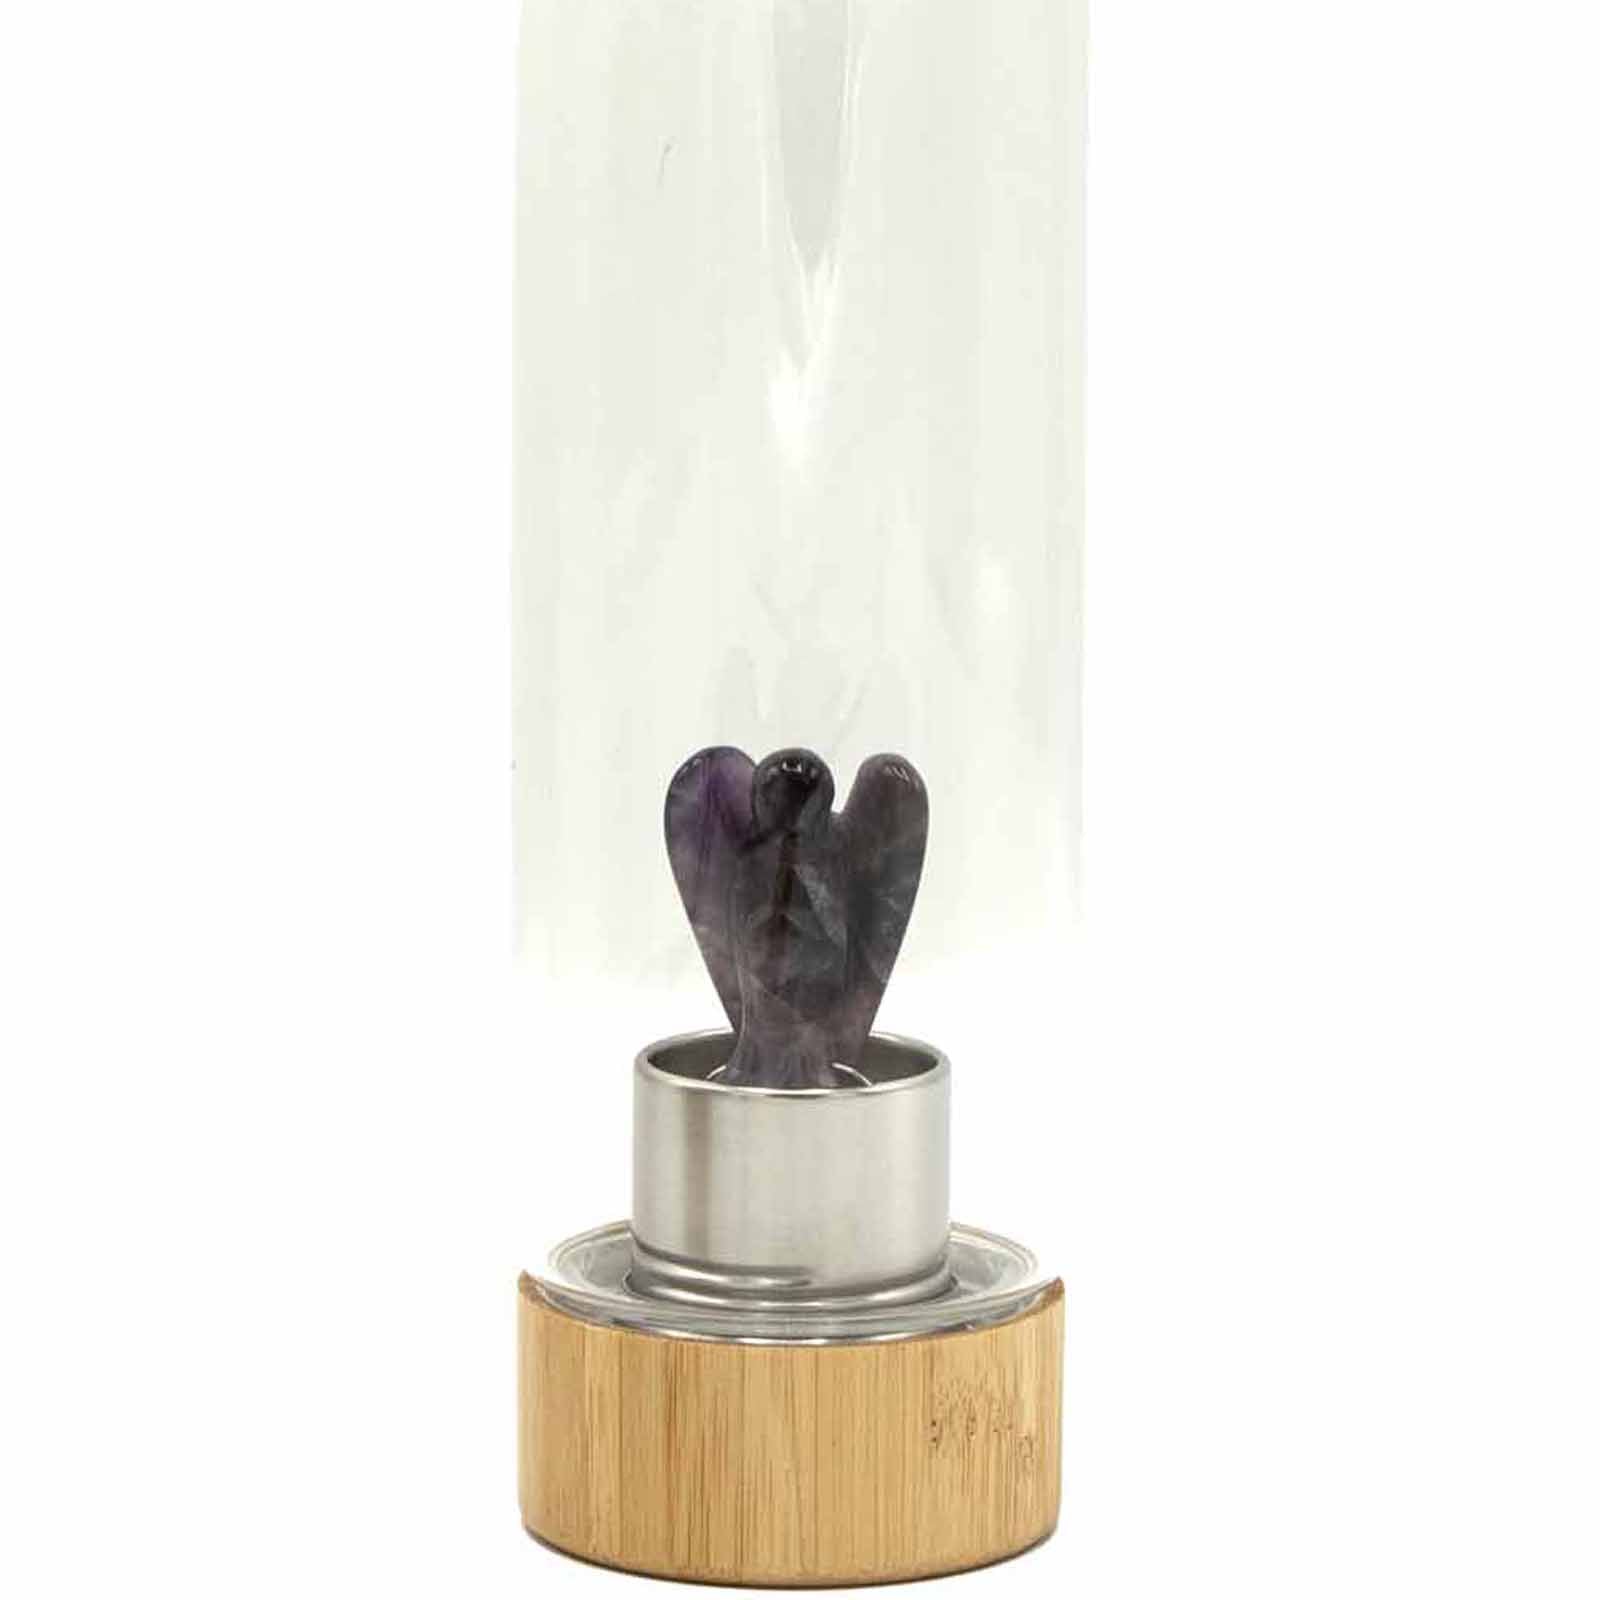 Crystal Infused Glass Water Bottle - Relaxing Amethyst - Angel